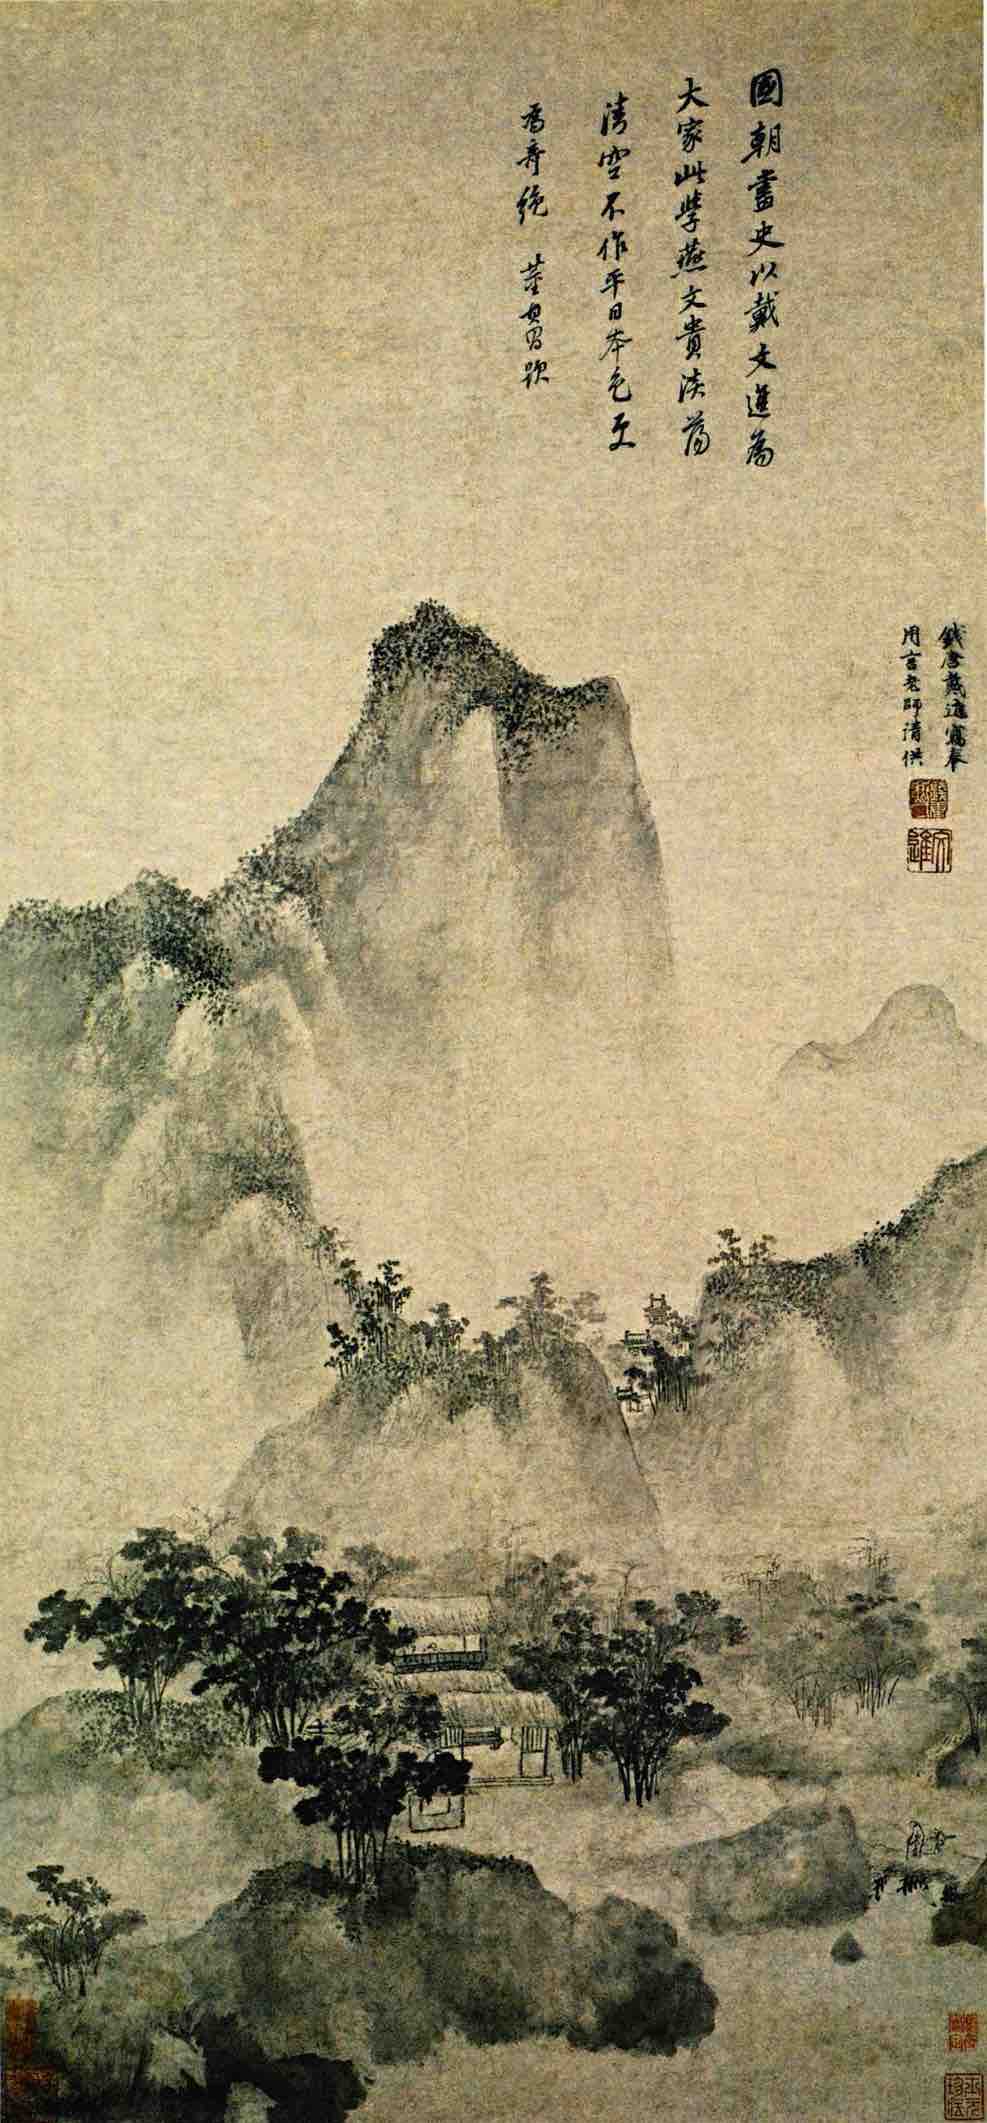 <em>Landscape in the Style of Yan Wengui</em> by Dai Jin, hanging scroll, ink on paper (Early Ming Dynasty)